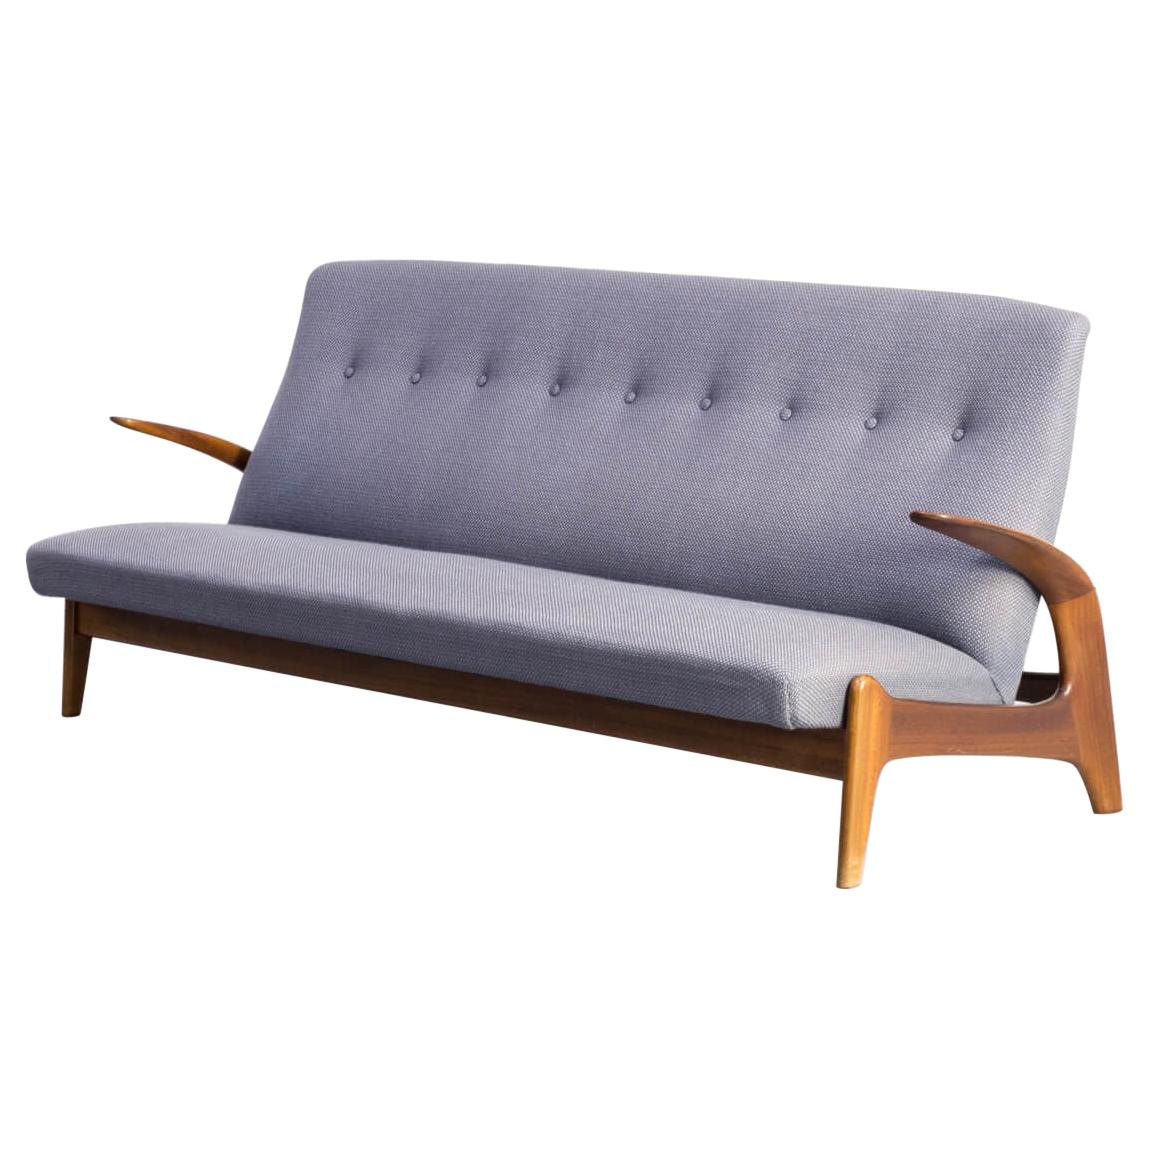 1960s Rastad & Relling Three-Seat Sofa for Gimson and Slater For Sale